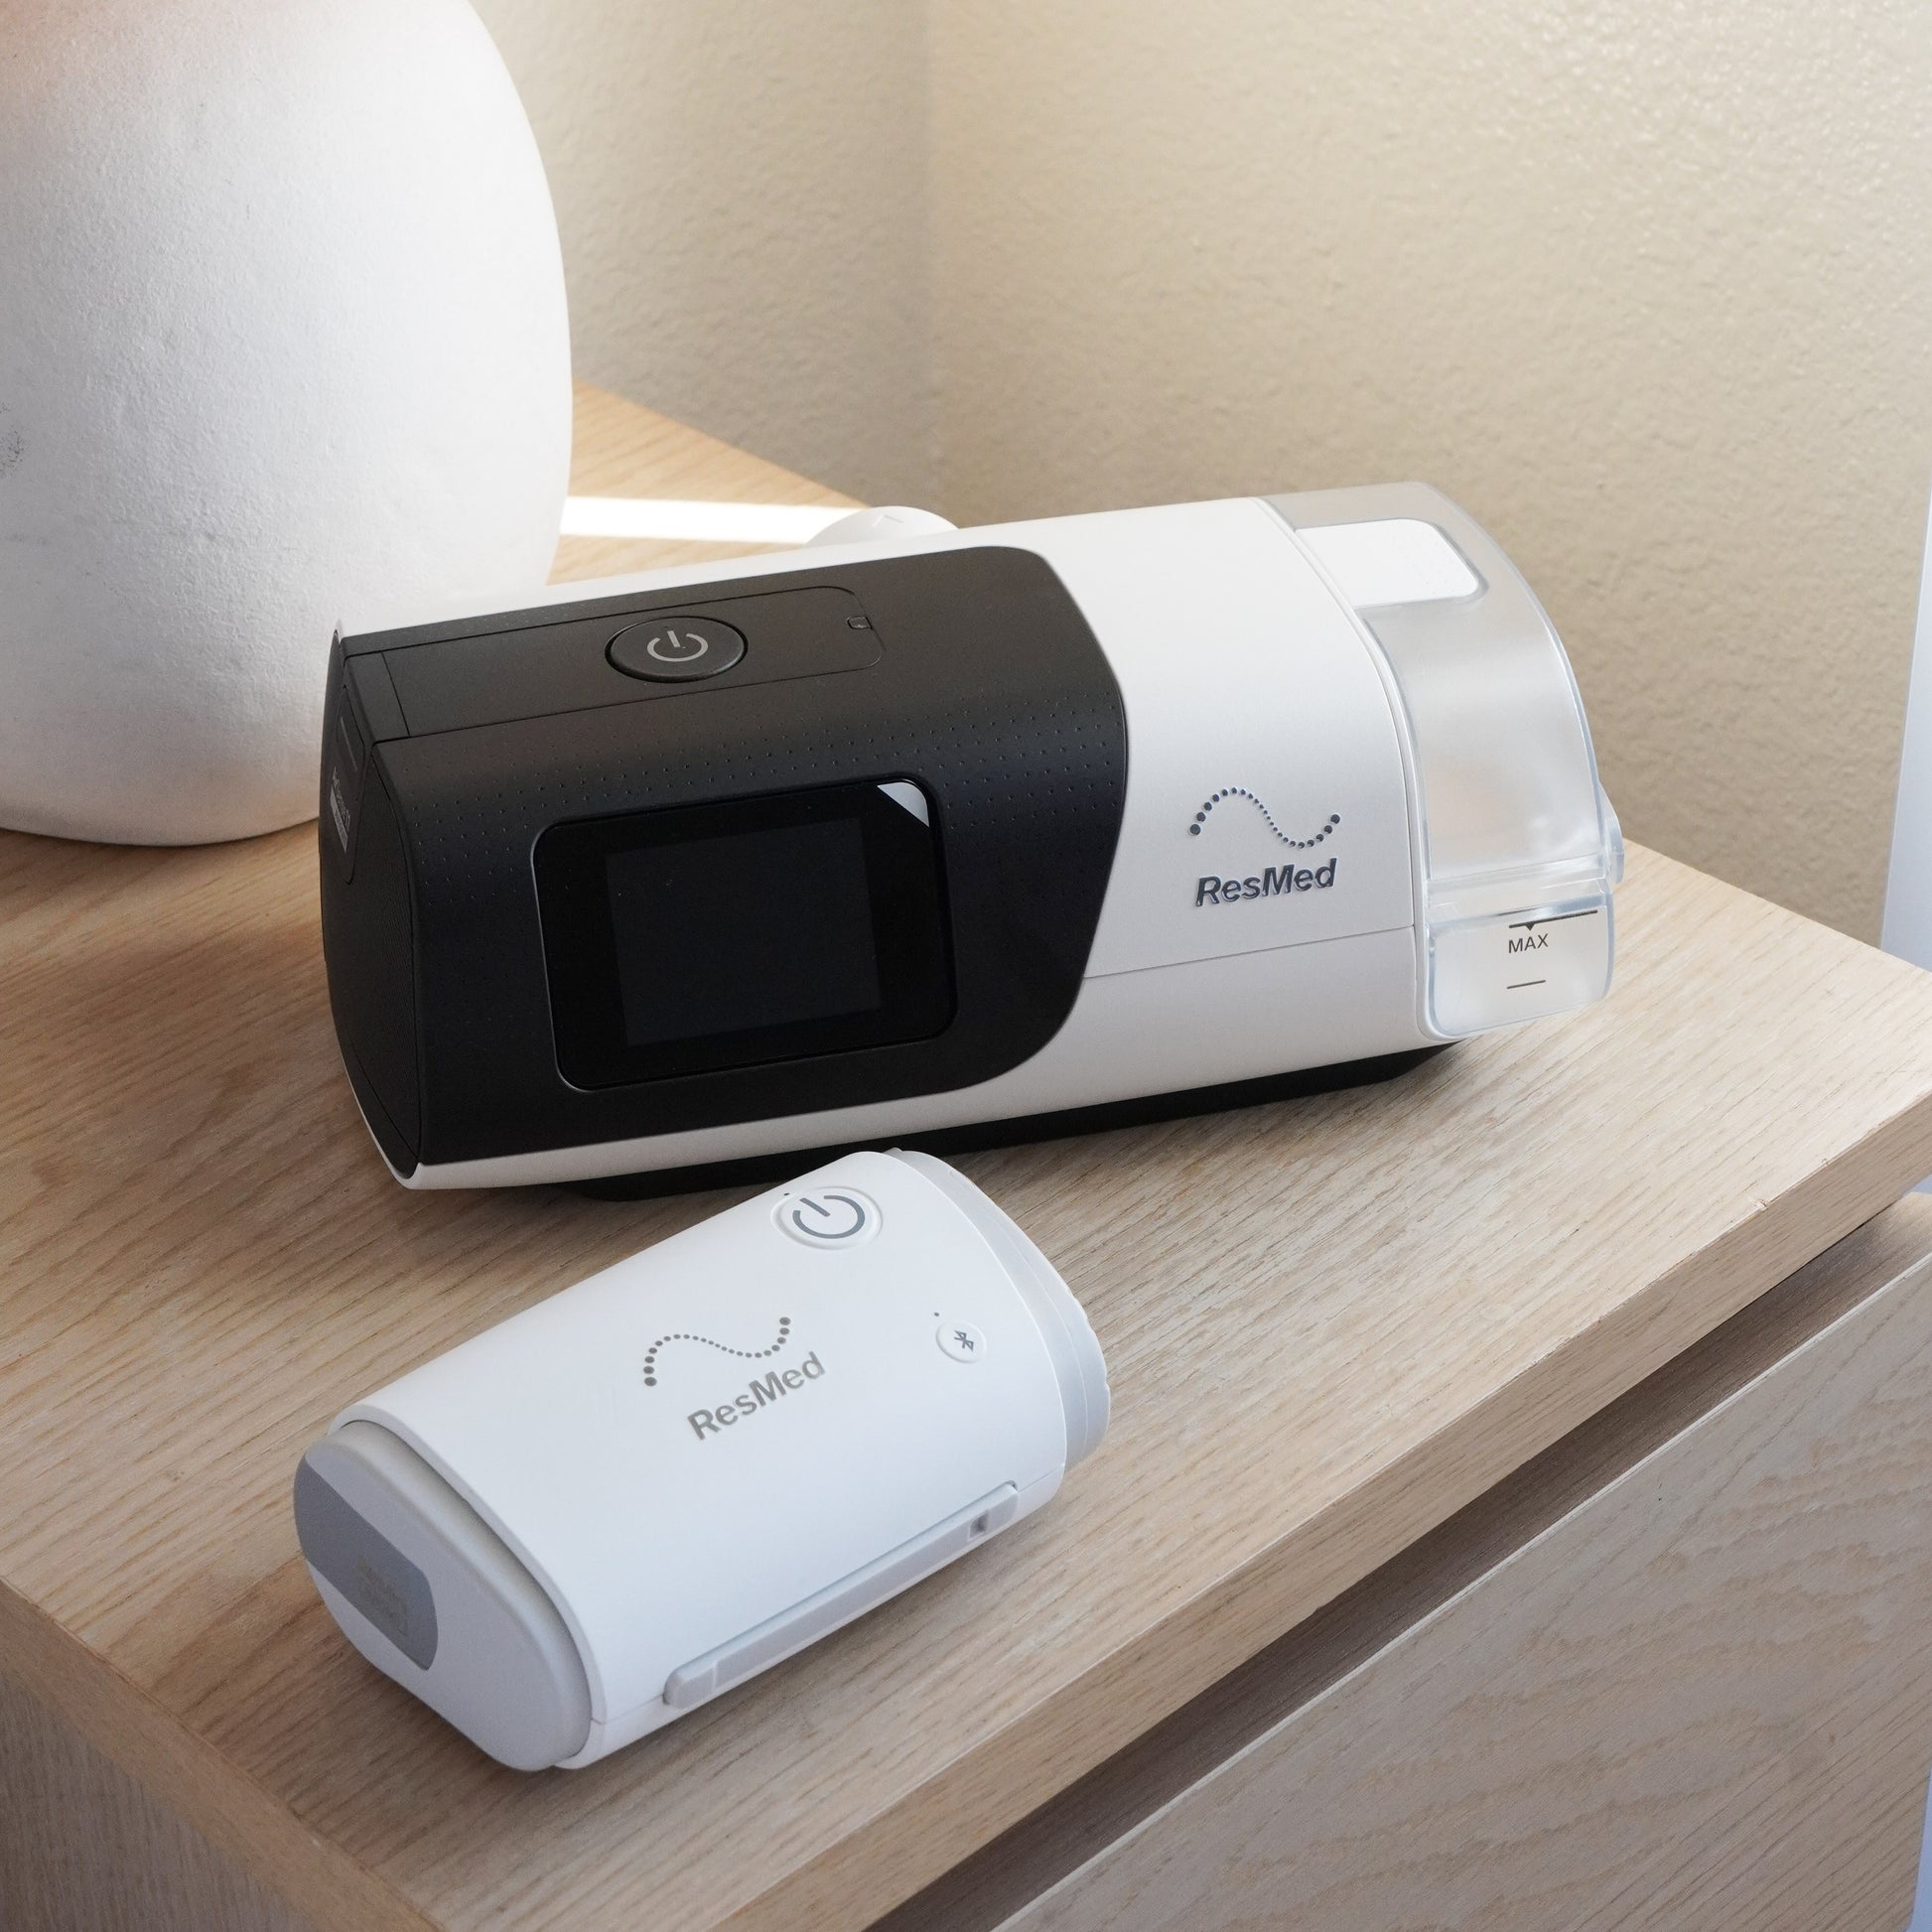 The ResMed AirMini next to the ResMed AirSense 11 on a bedside table for size comparison. The ResMed AirMini is much smaller due to its compact travel size. 